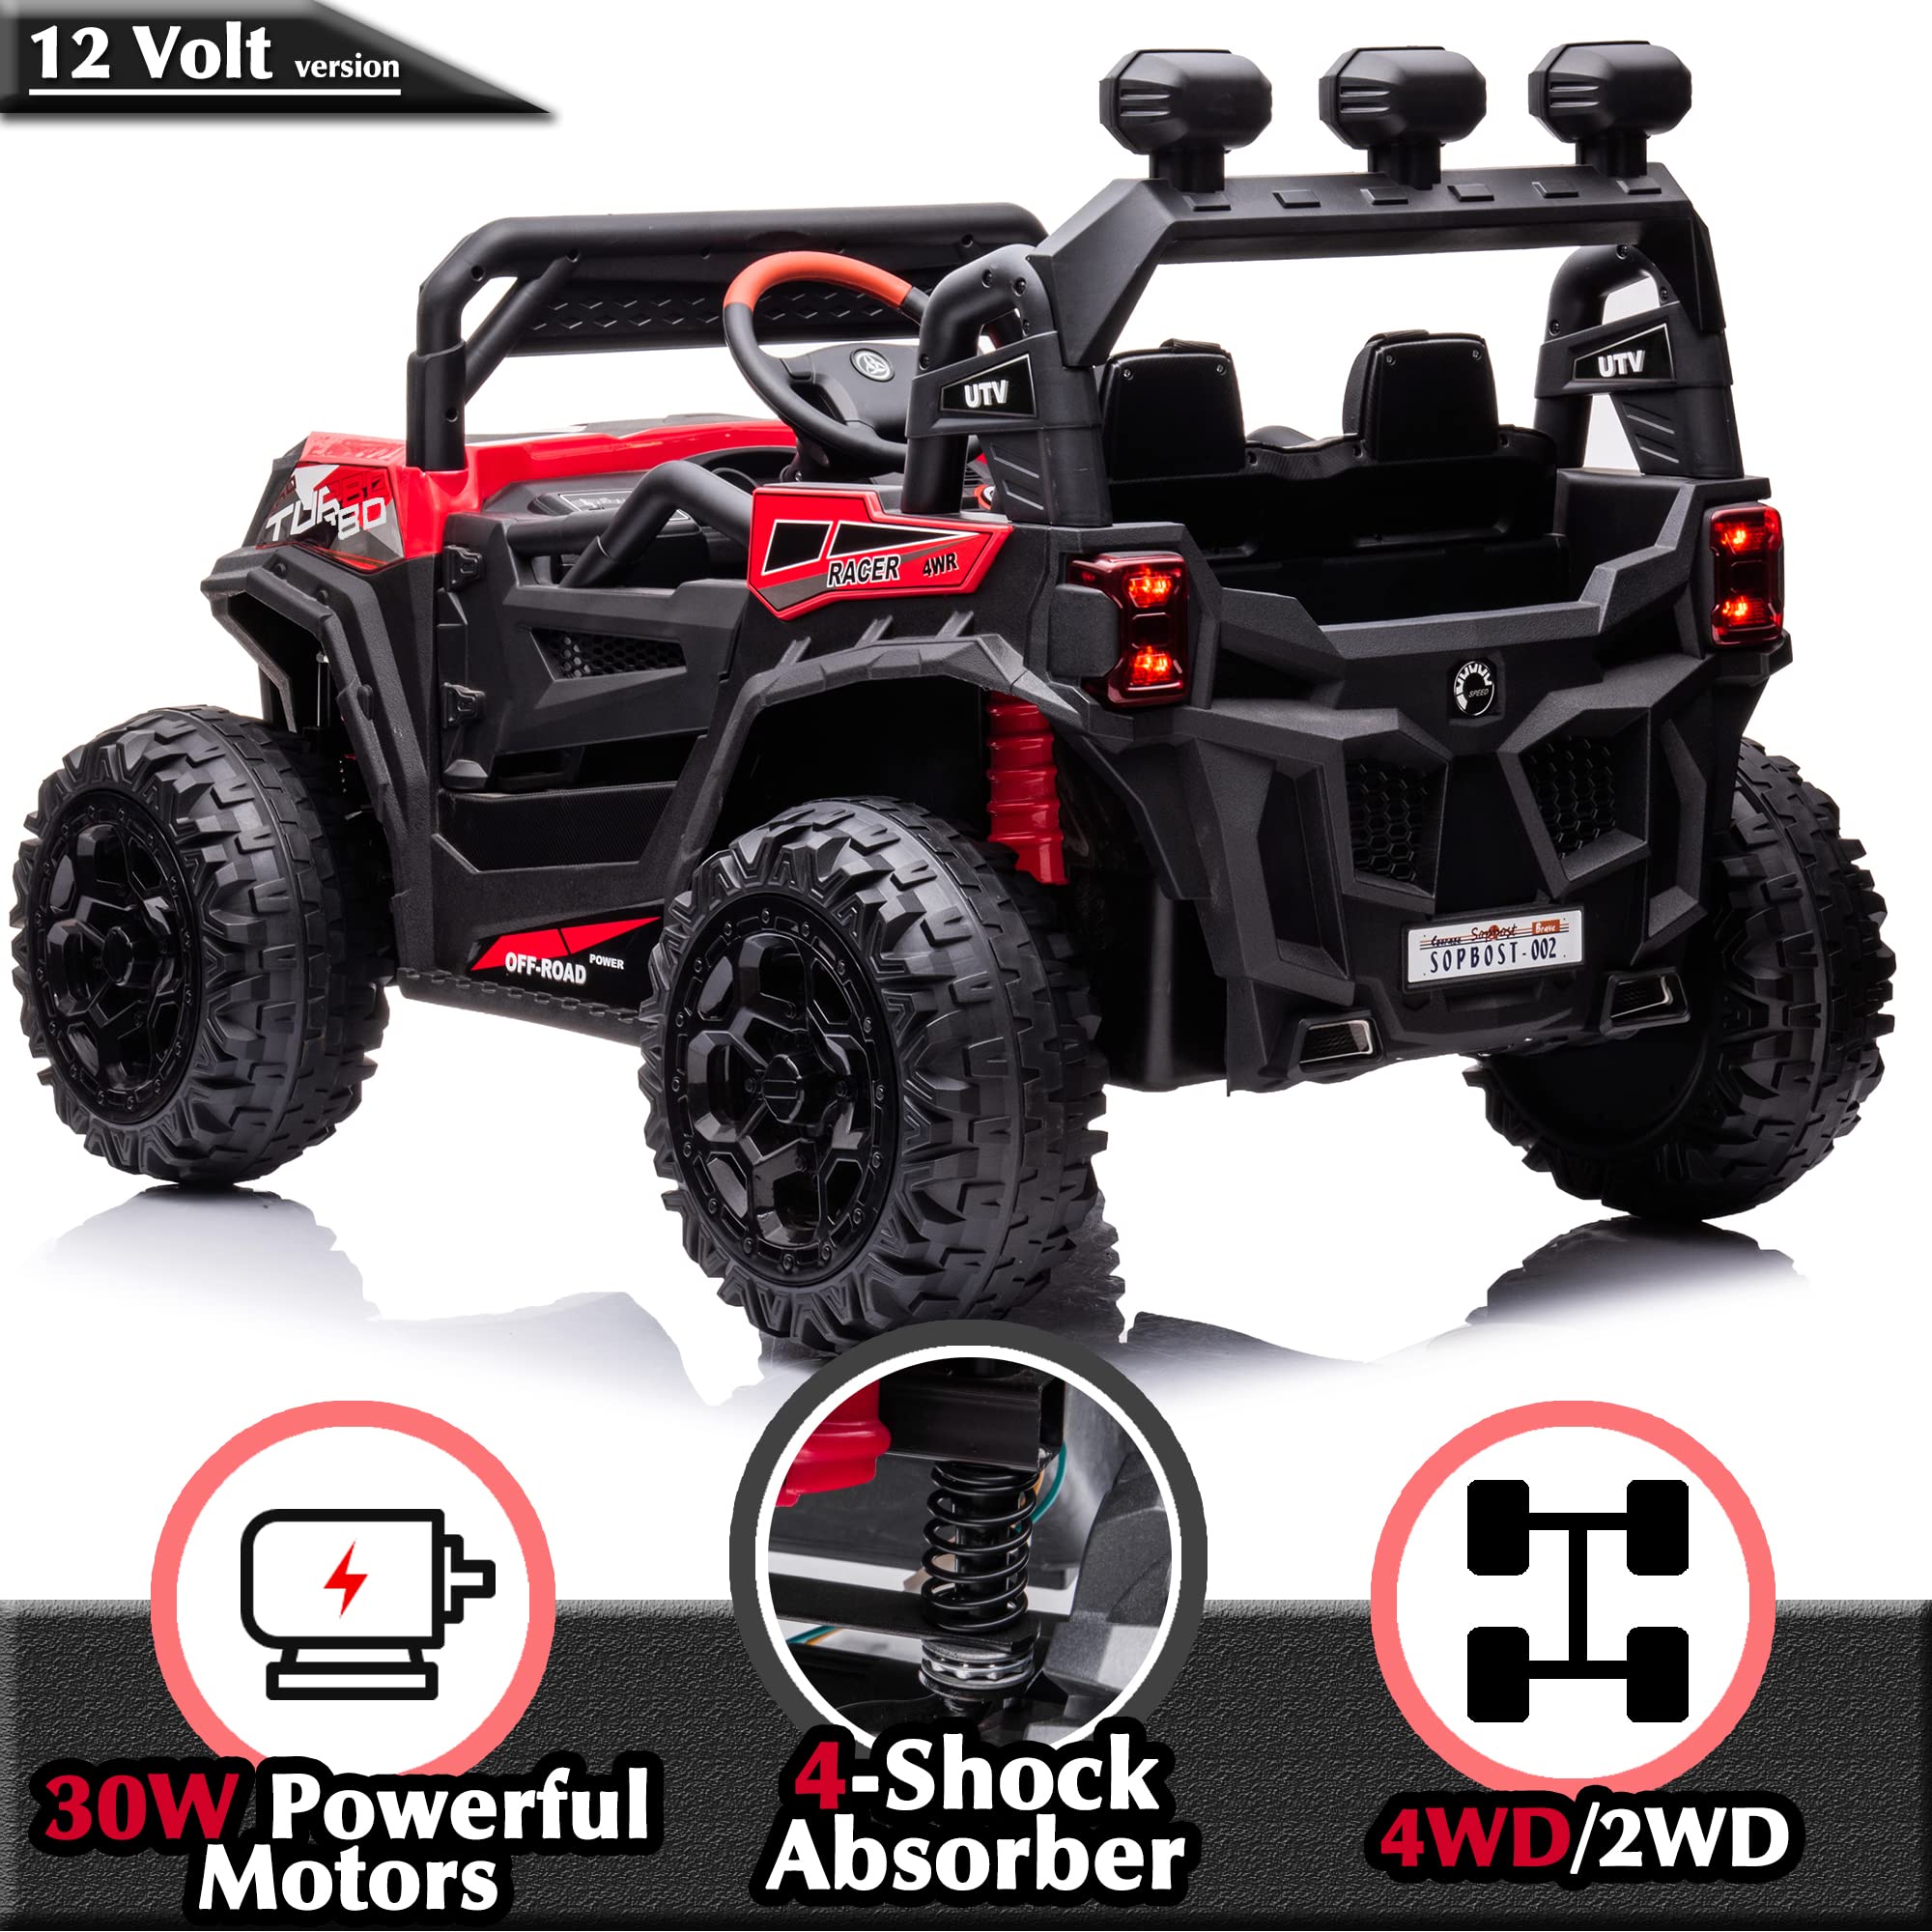 sopbost 12V 10AH Power Buggy 4x4 Kids Ride On Truck UTV 2WD/4WD Switchable Ride On Car with Remote Control Ride On Toys Electric Off-Road UTV Vehicle with Car Keys, 4 Shock Absorbers, Music Play, Red